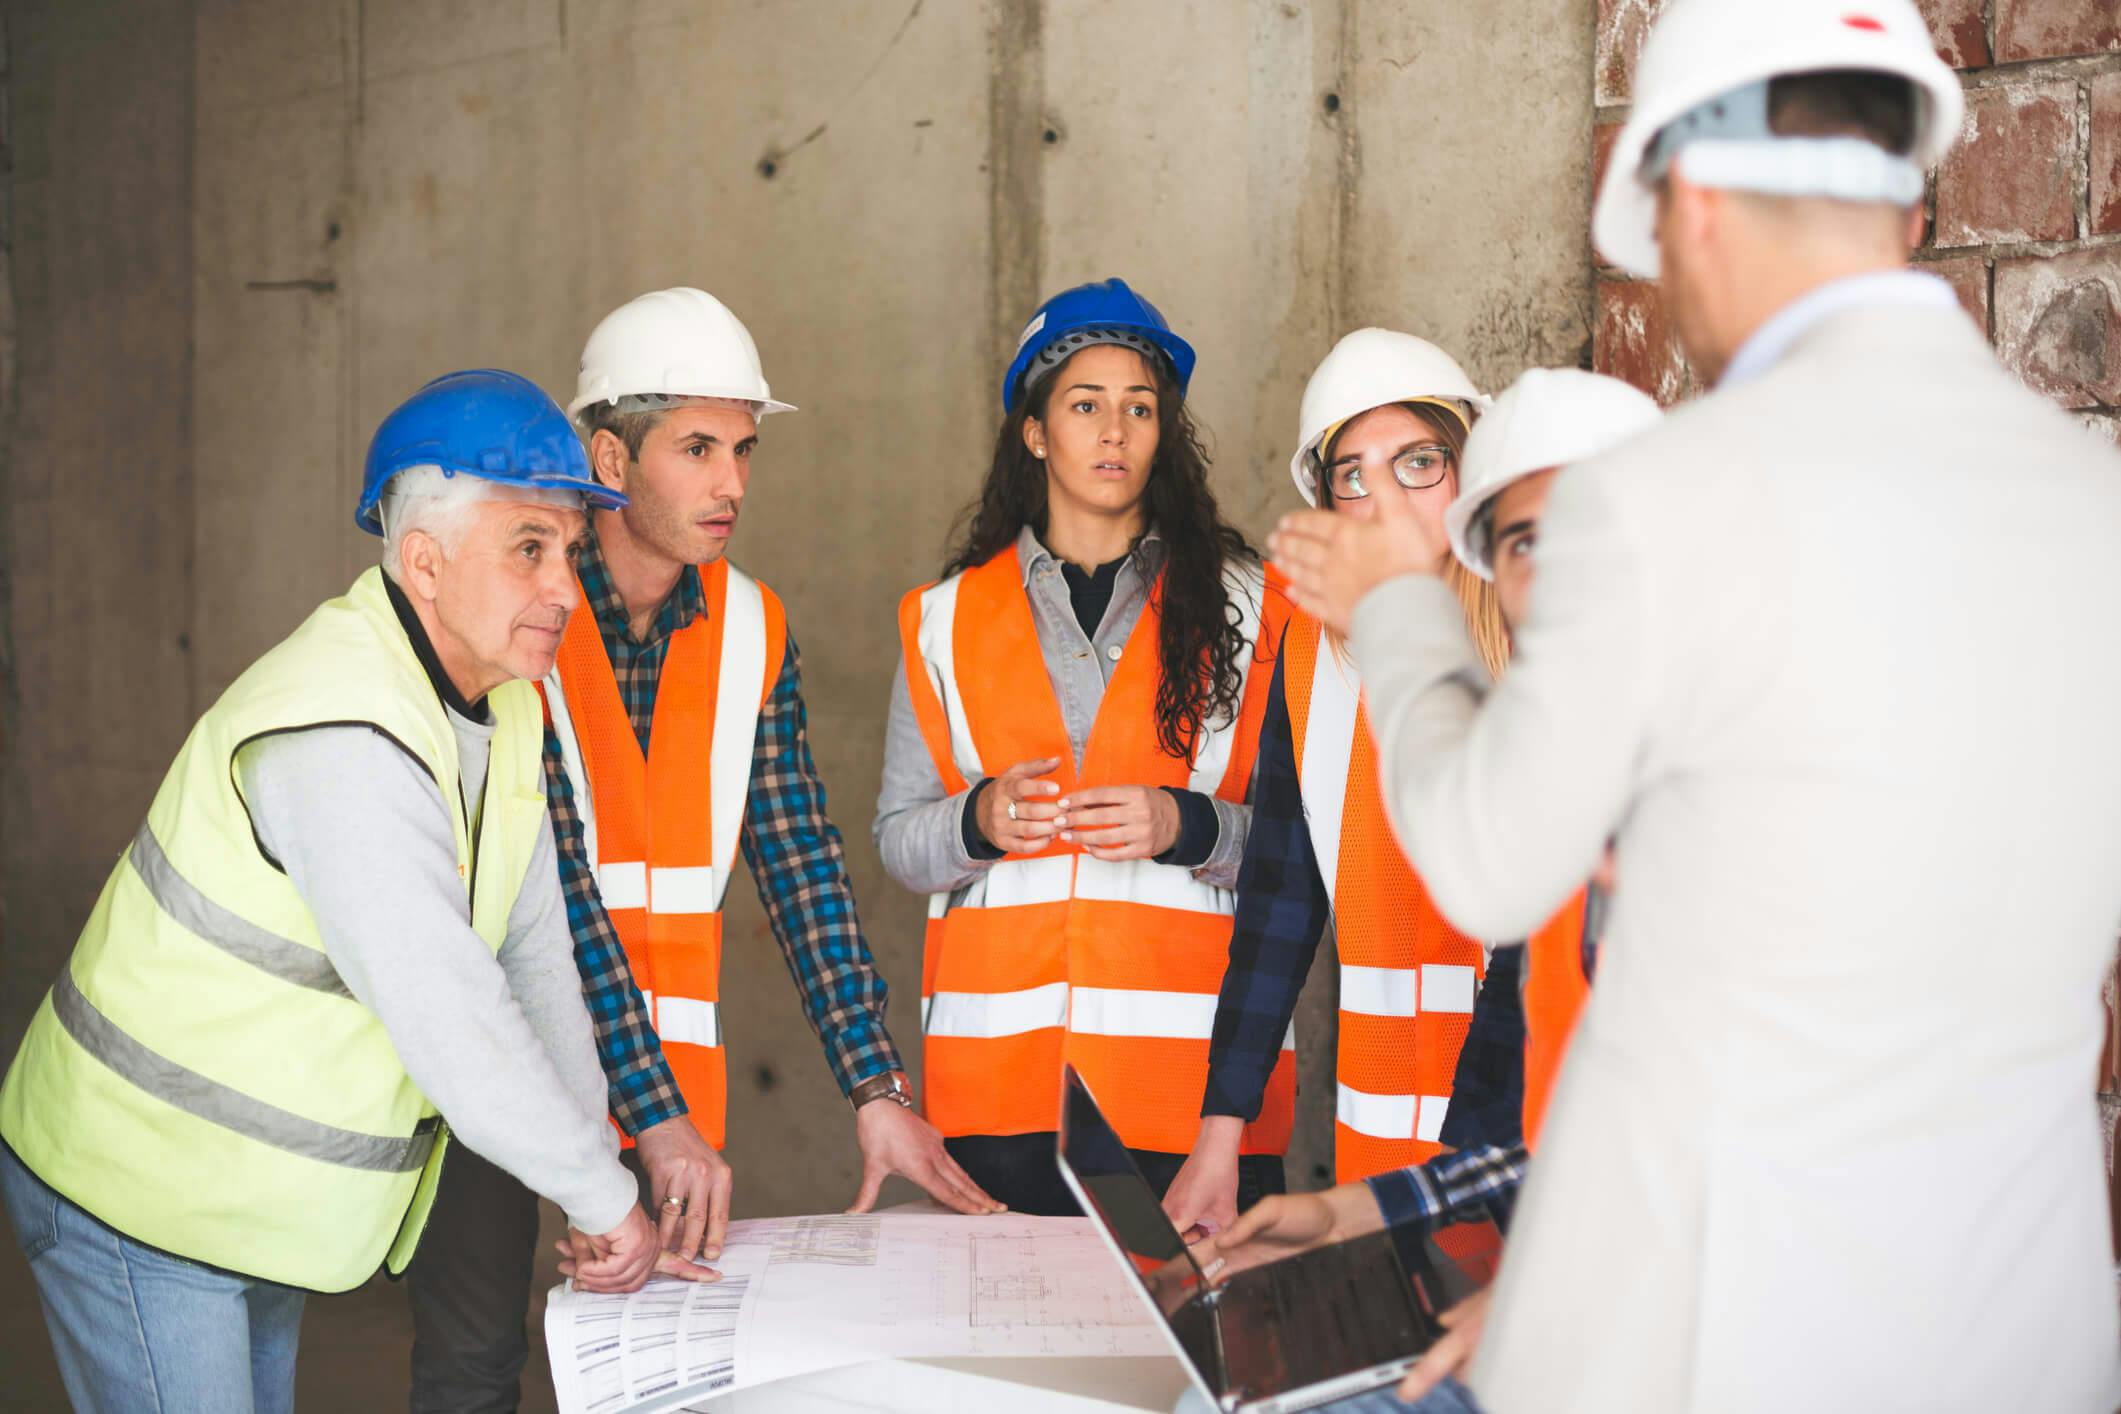 Keep Your Employees Safe: Employer's Guide to Workplace Safety